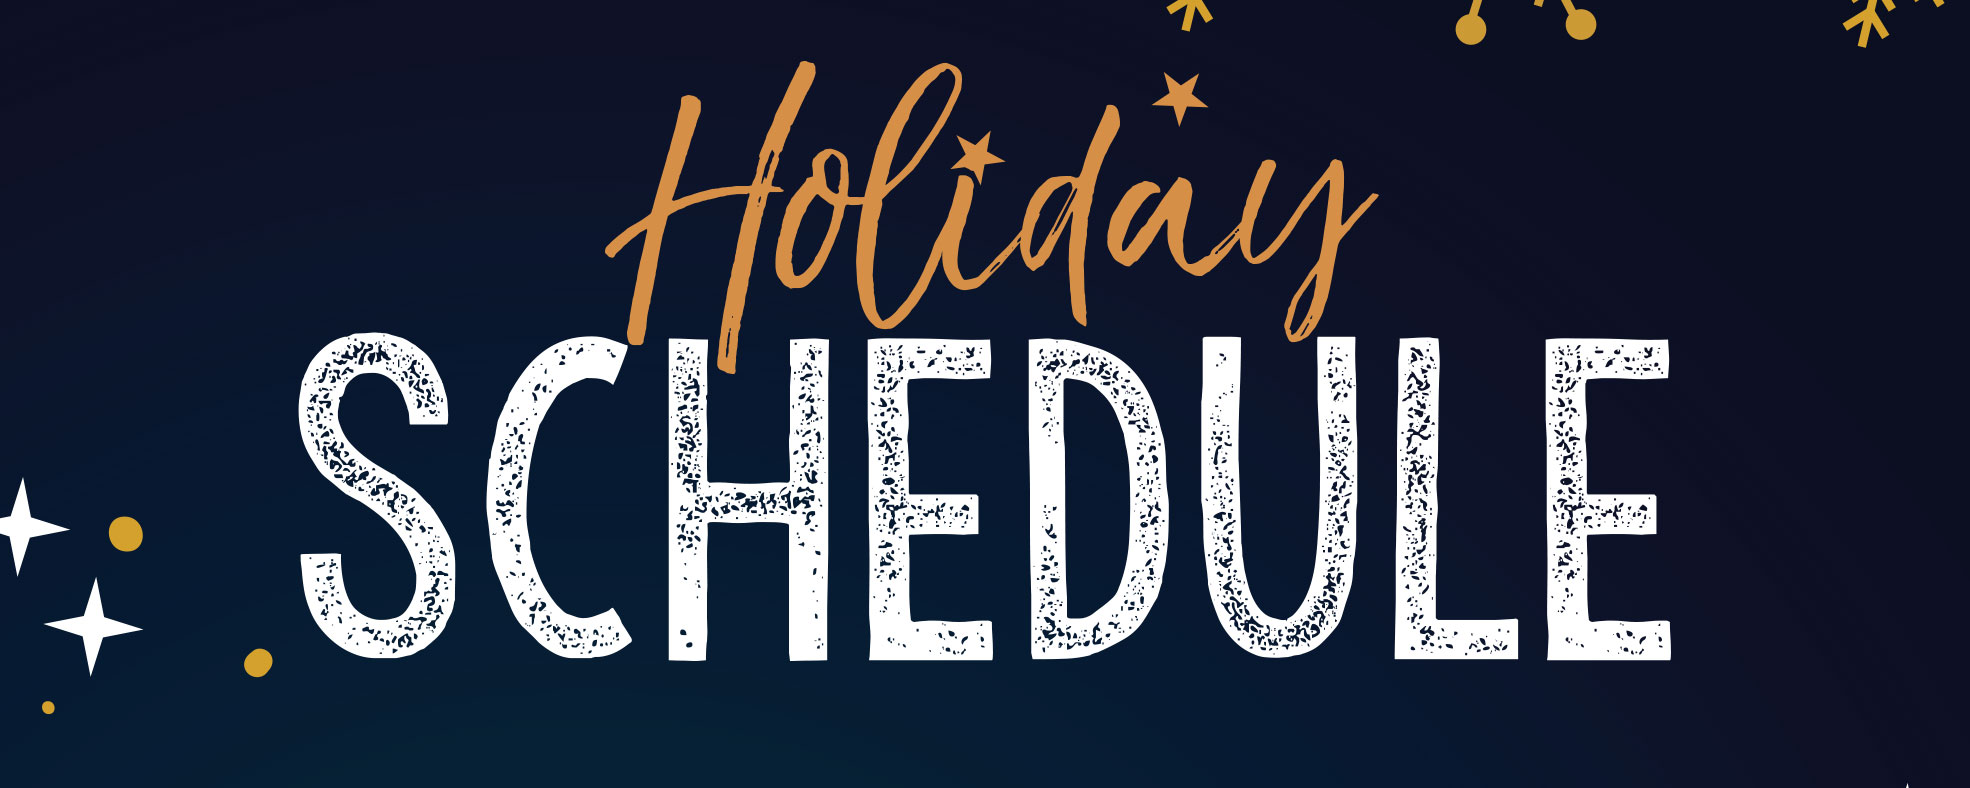 Holiday Schedule - The O Guide